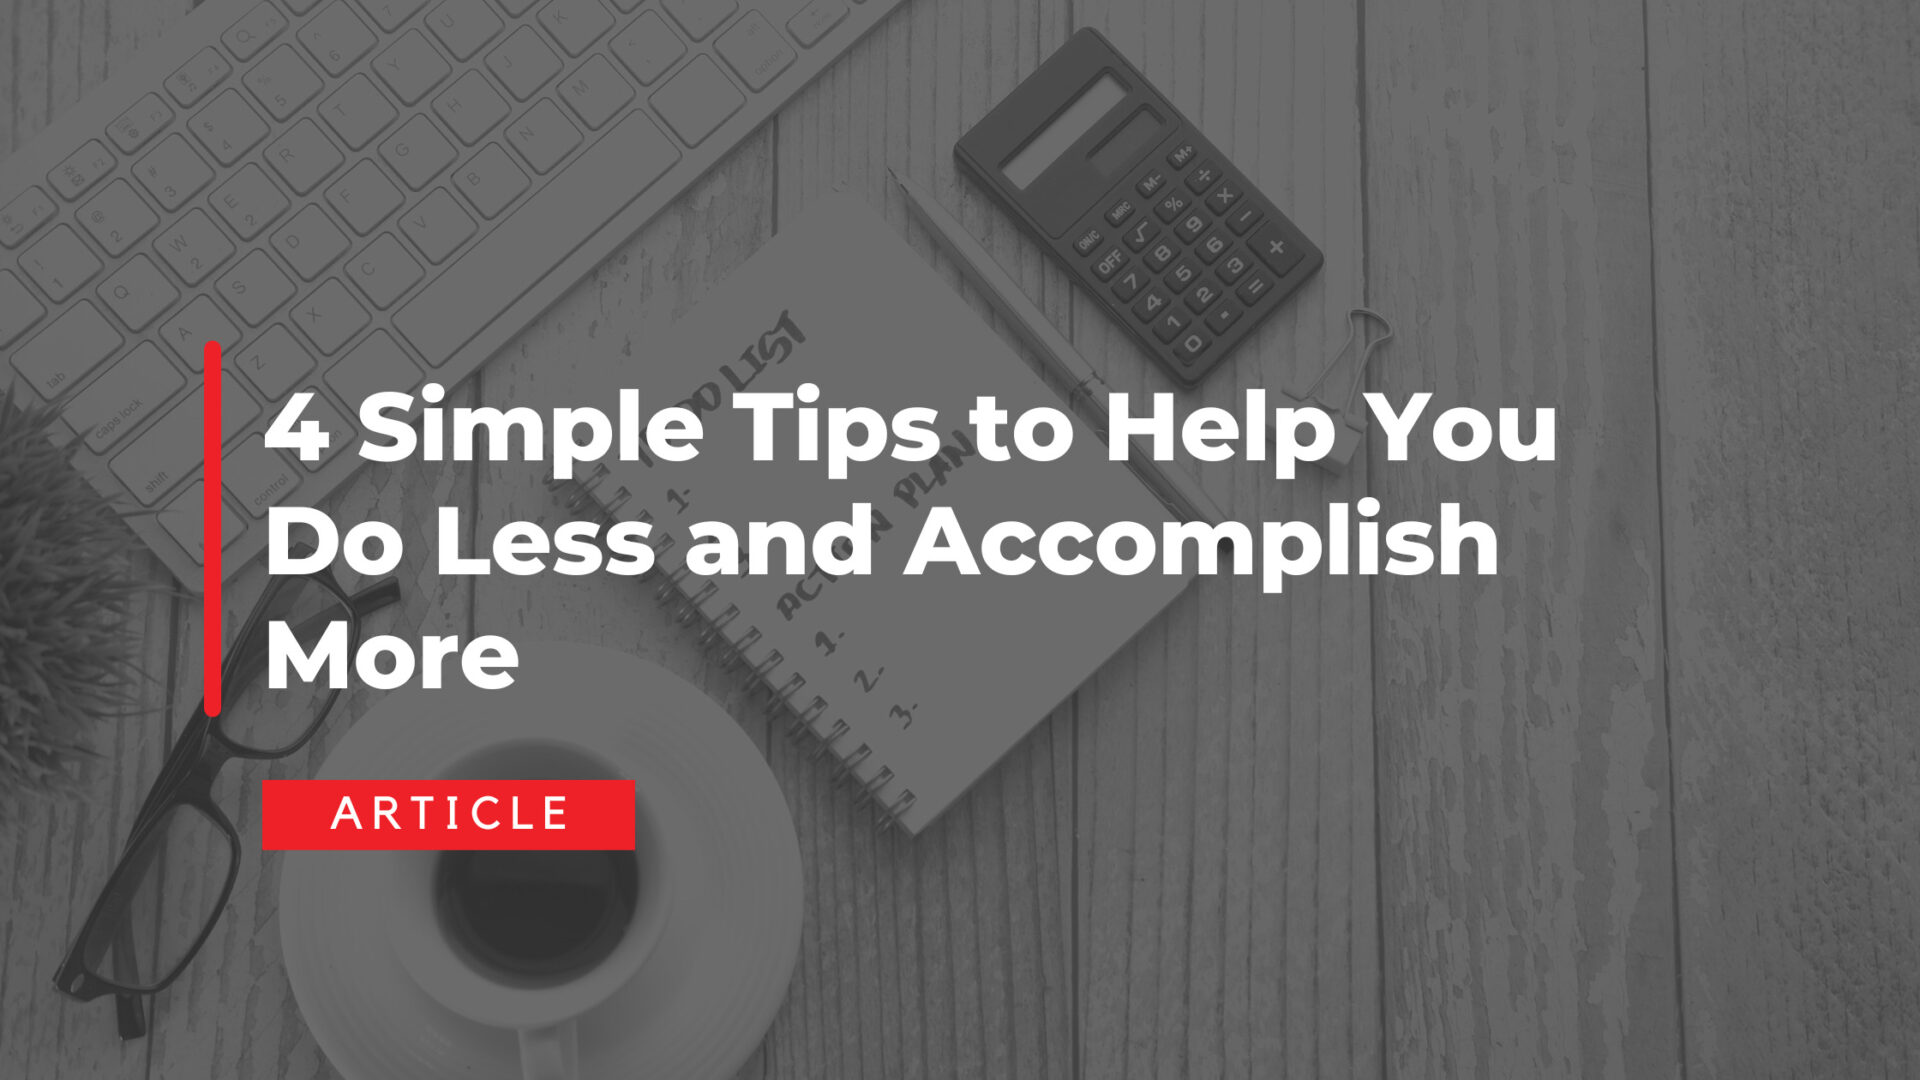 4 Simple Tips to Help You Do Less and Accomplish More